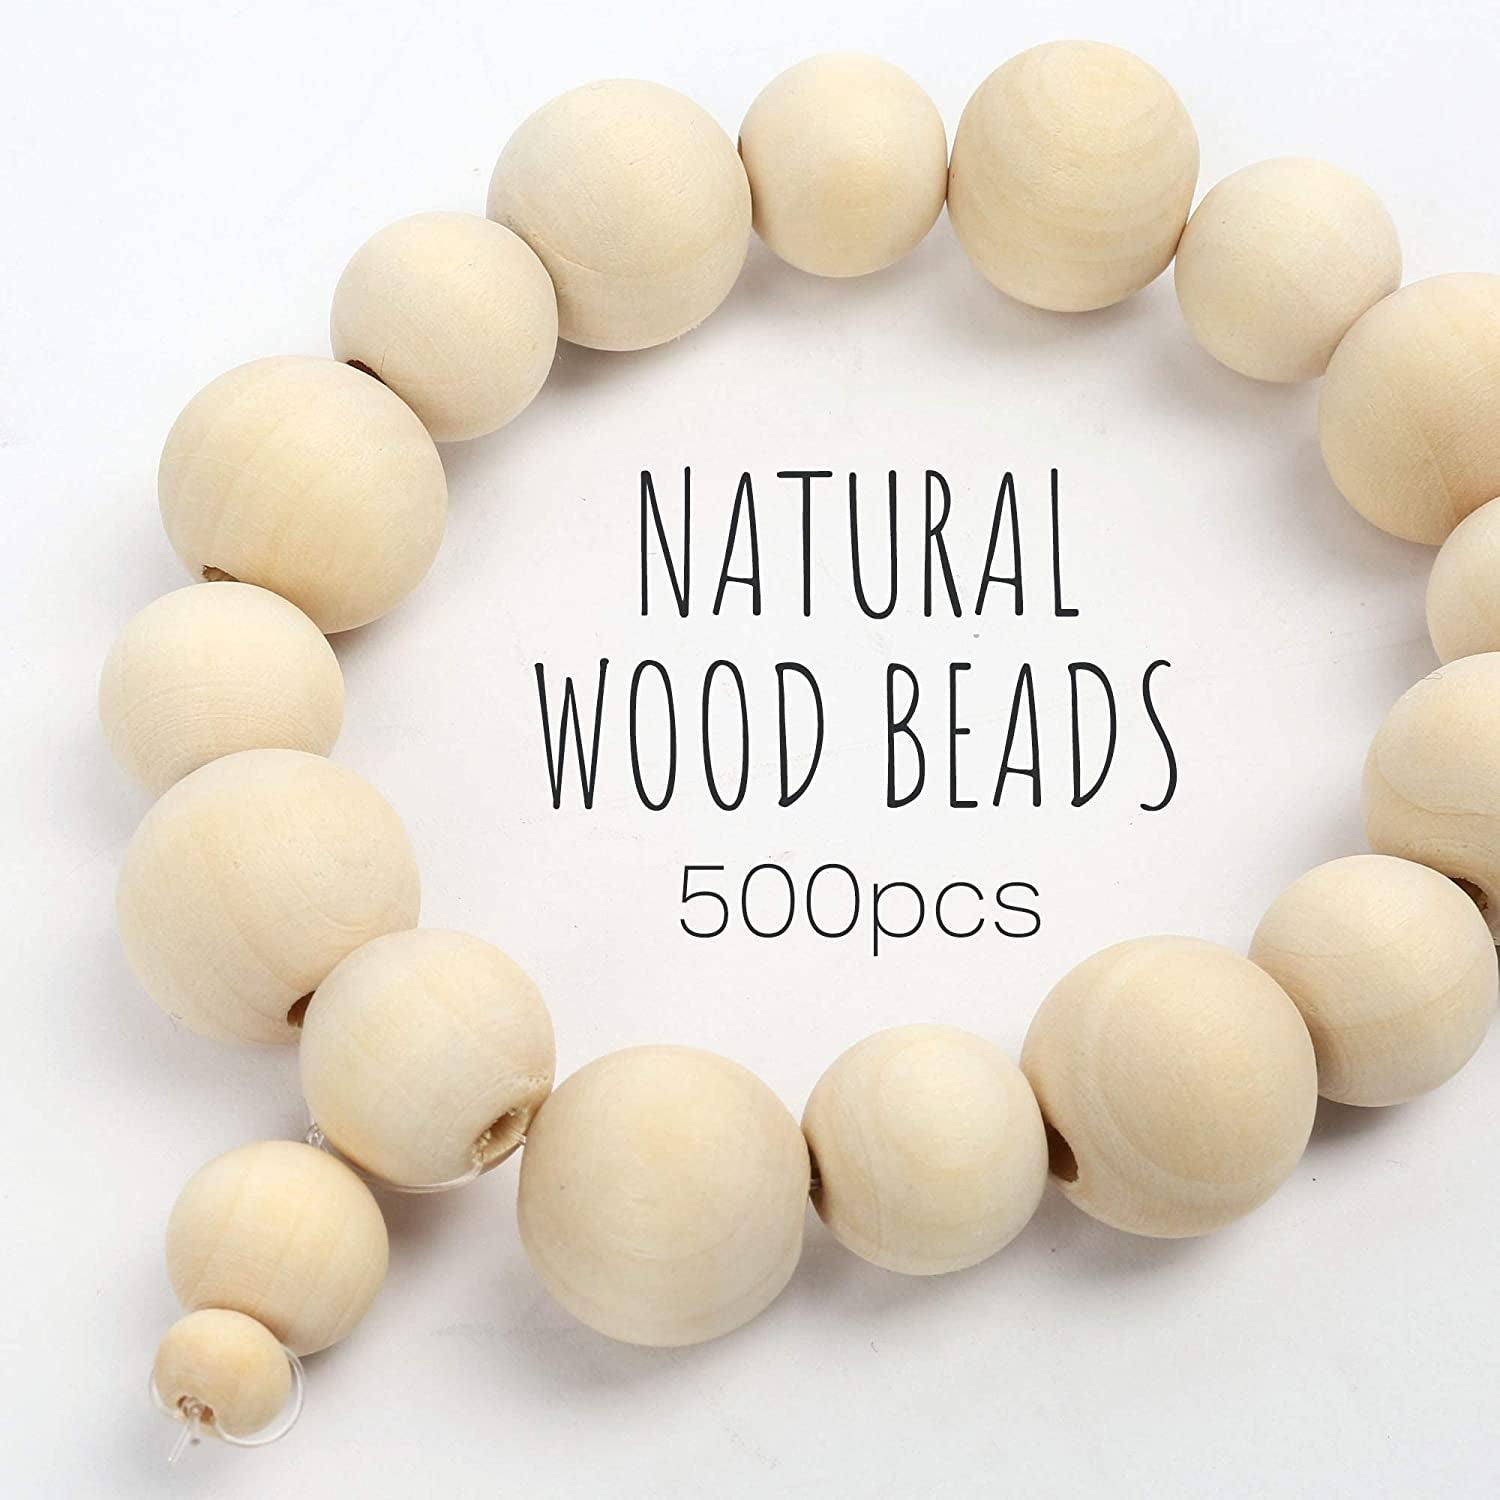 88 Pieces Wood Ball Wood Craft Balls Unfinished round Wooden Balls for DIY  Craft Projects Jewelry Making Art Design in 5 Sizes